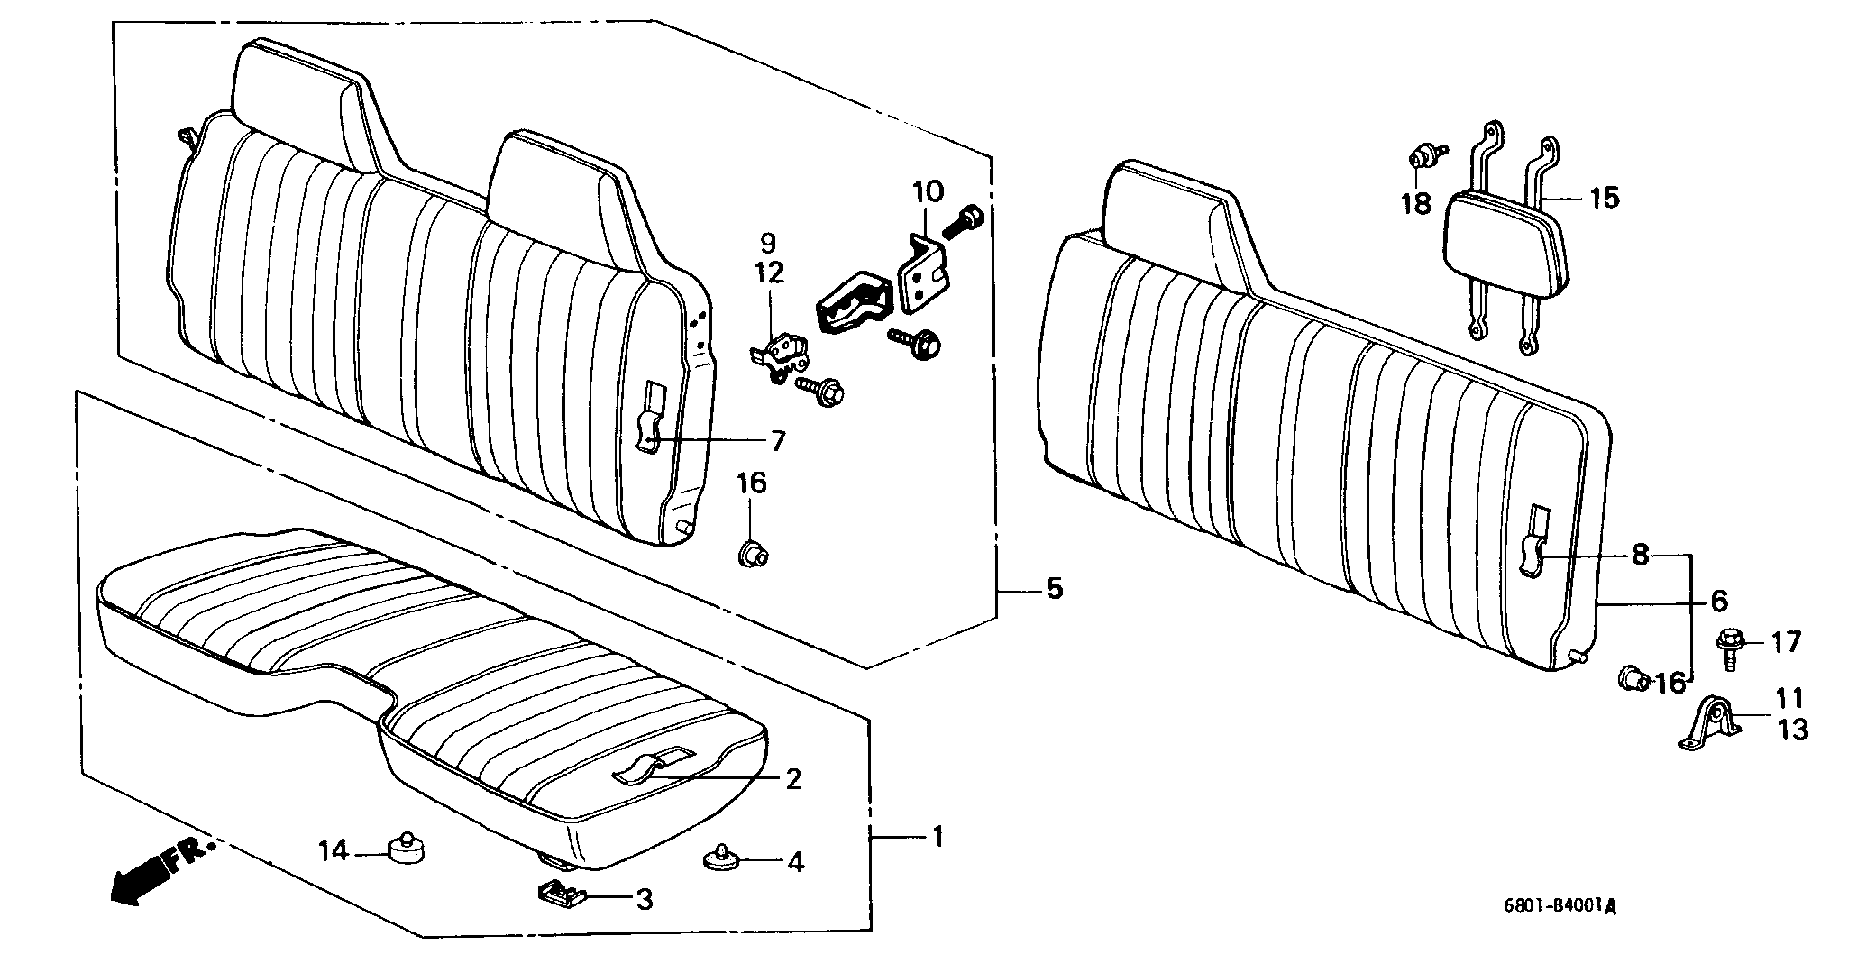 FRONT SEAT/ HEAD REST( BENCH SEAT)